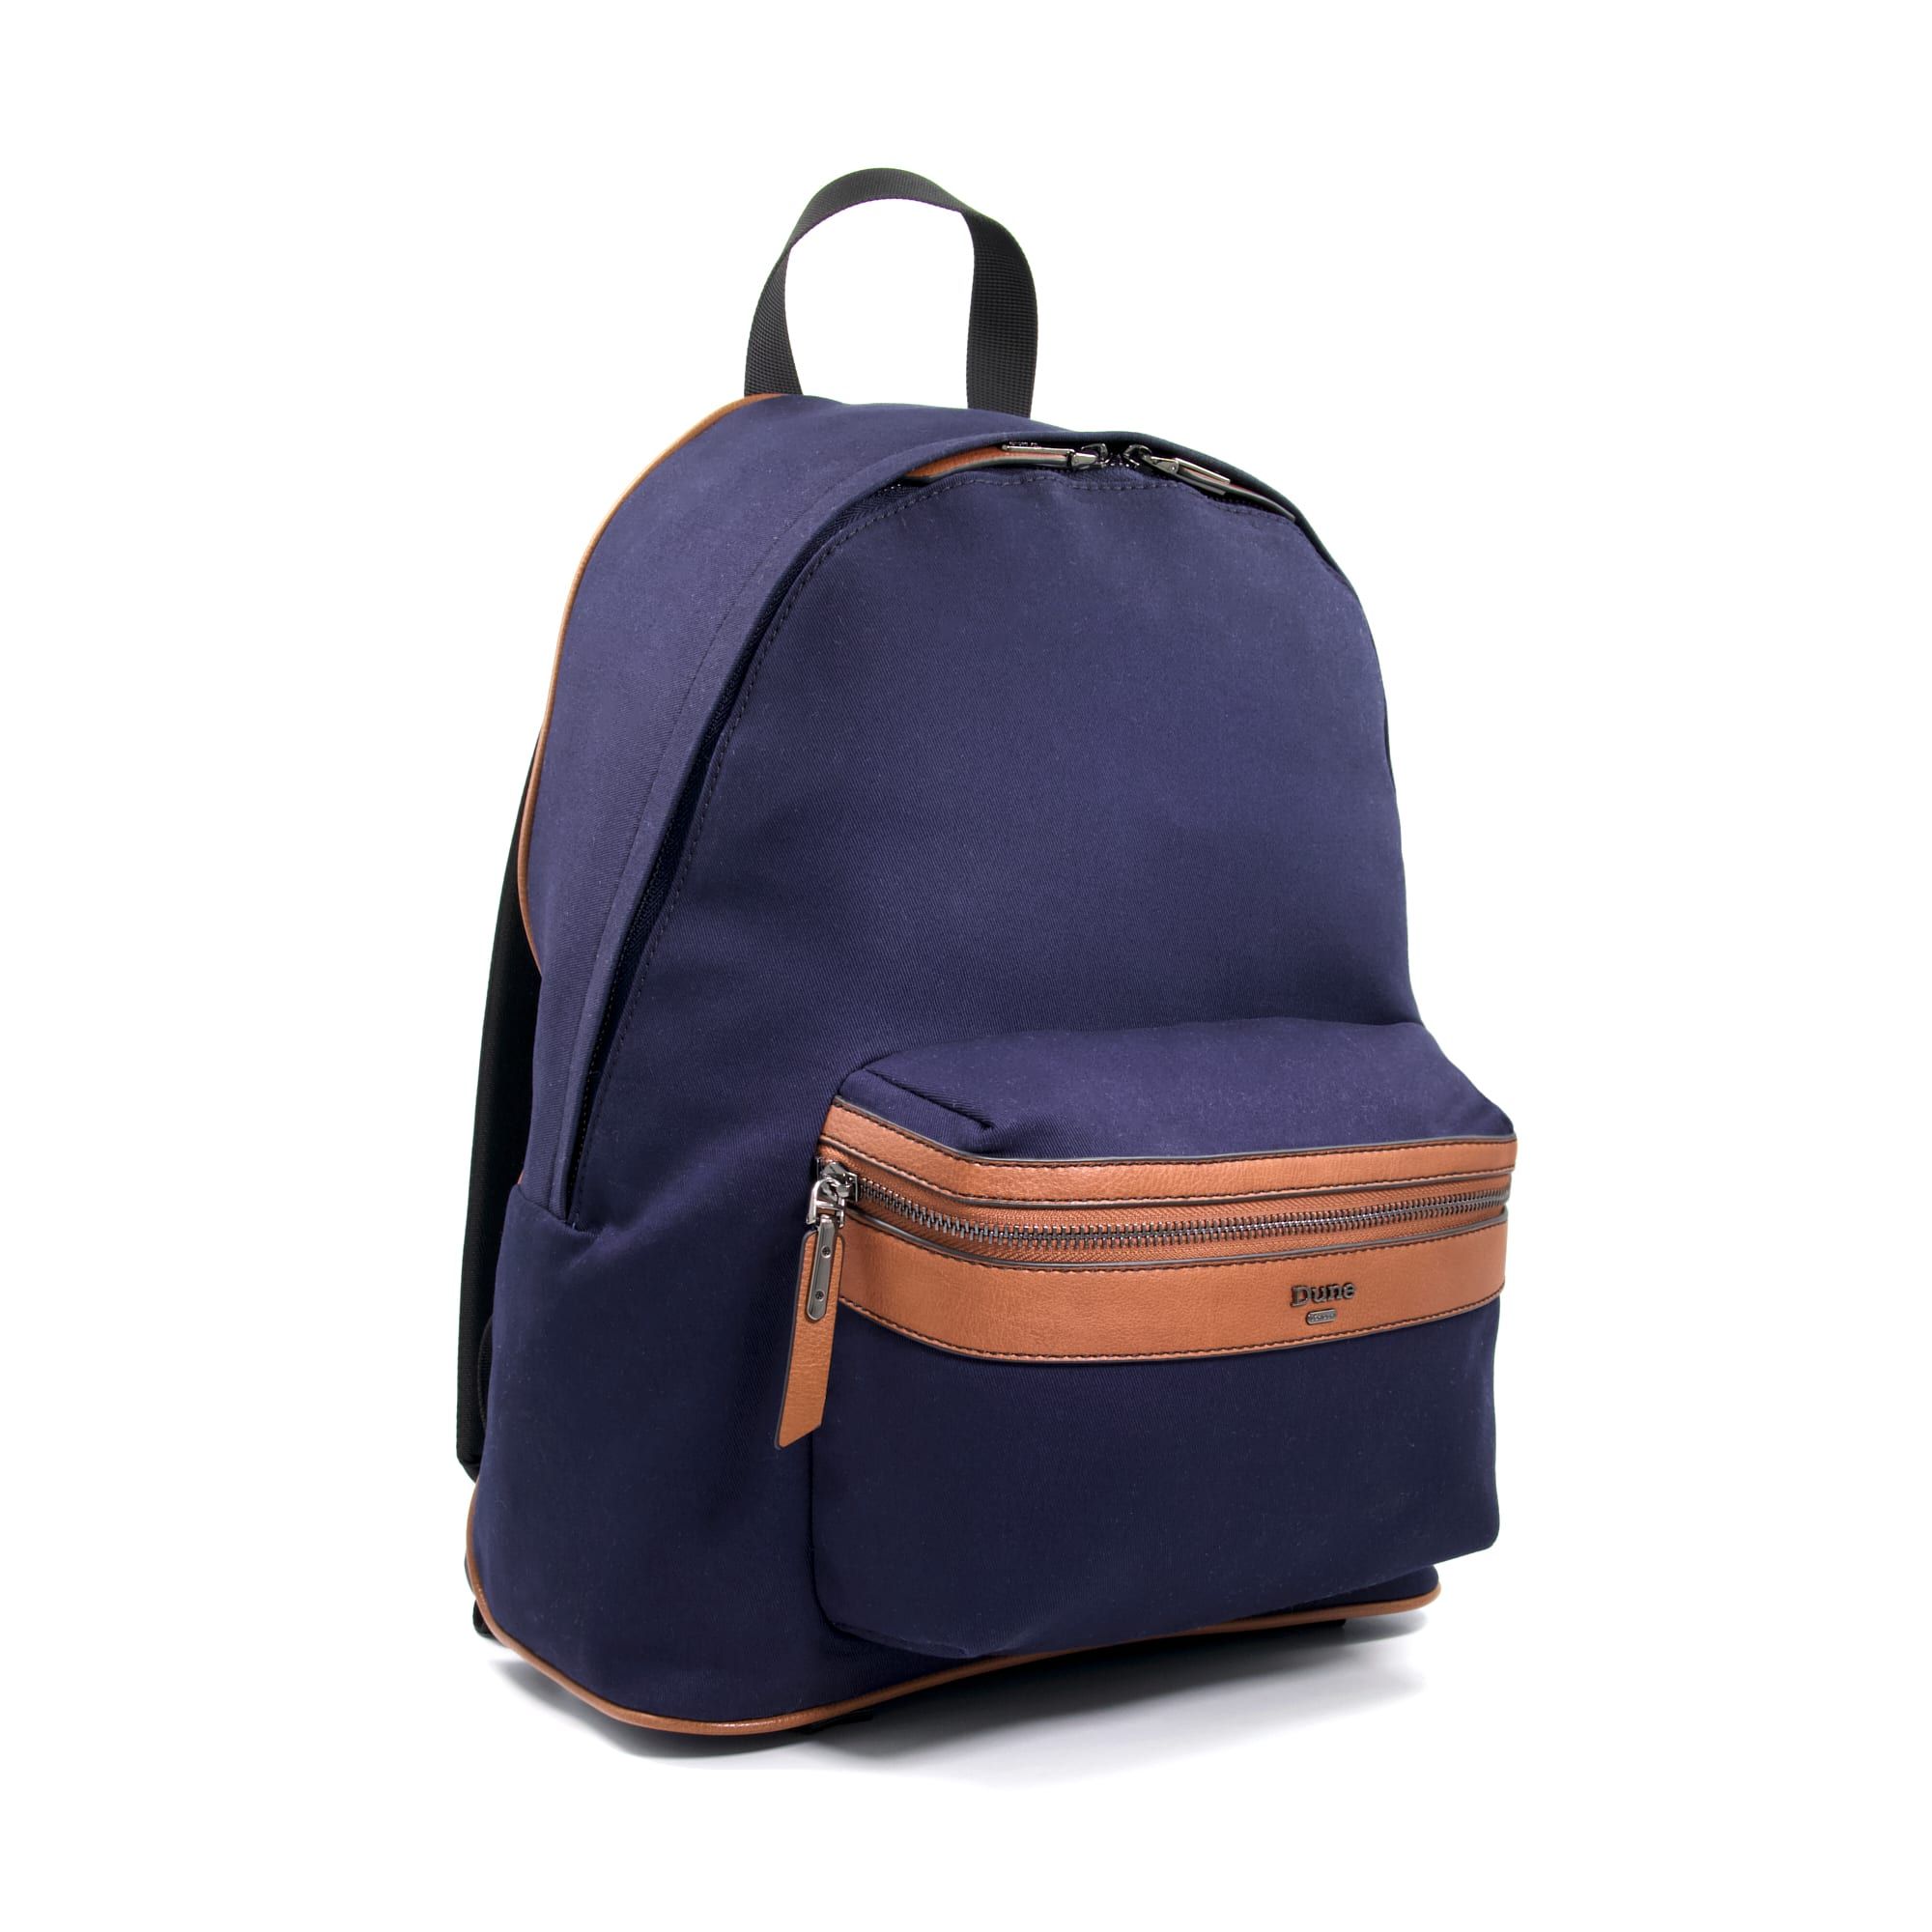 Office commutes and weekends away have never looked so stylish. This wonderfully lightweight backpack features adjustable straps, three zip compartments and a neutral, wear-with-everything colour palette.